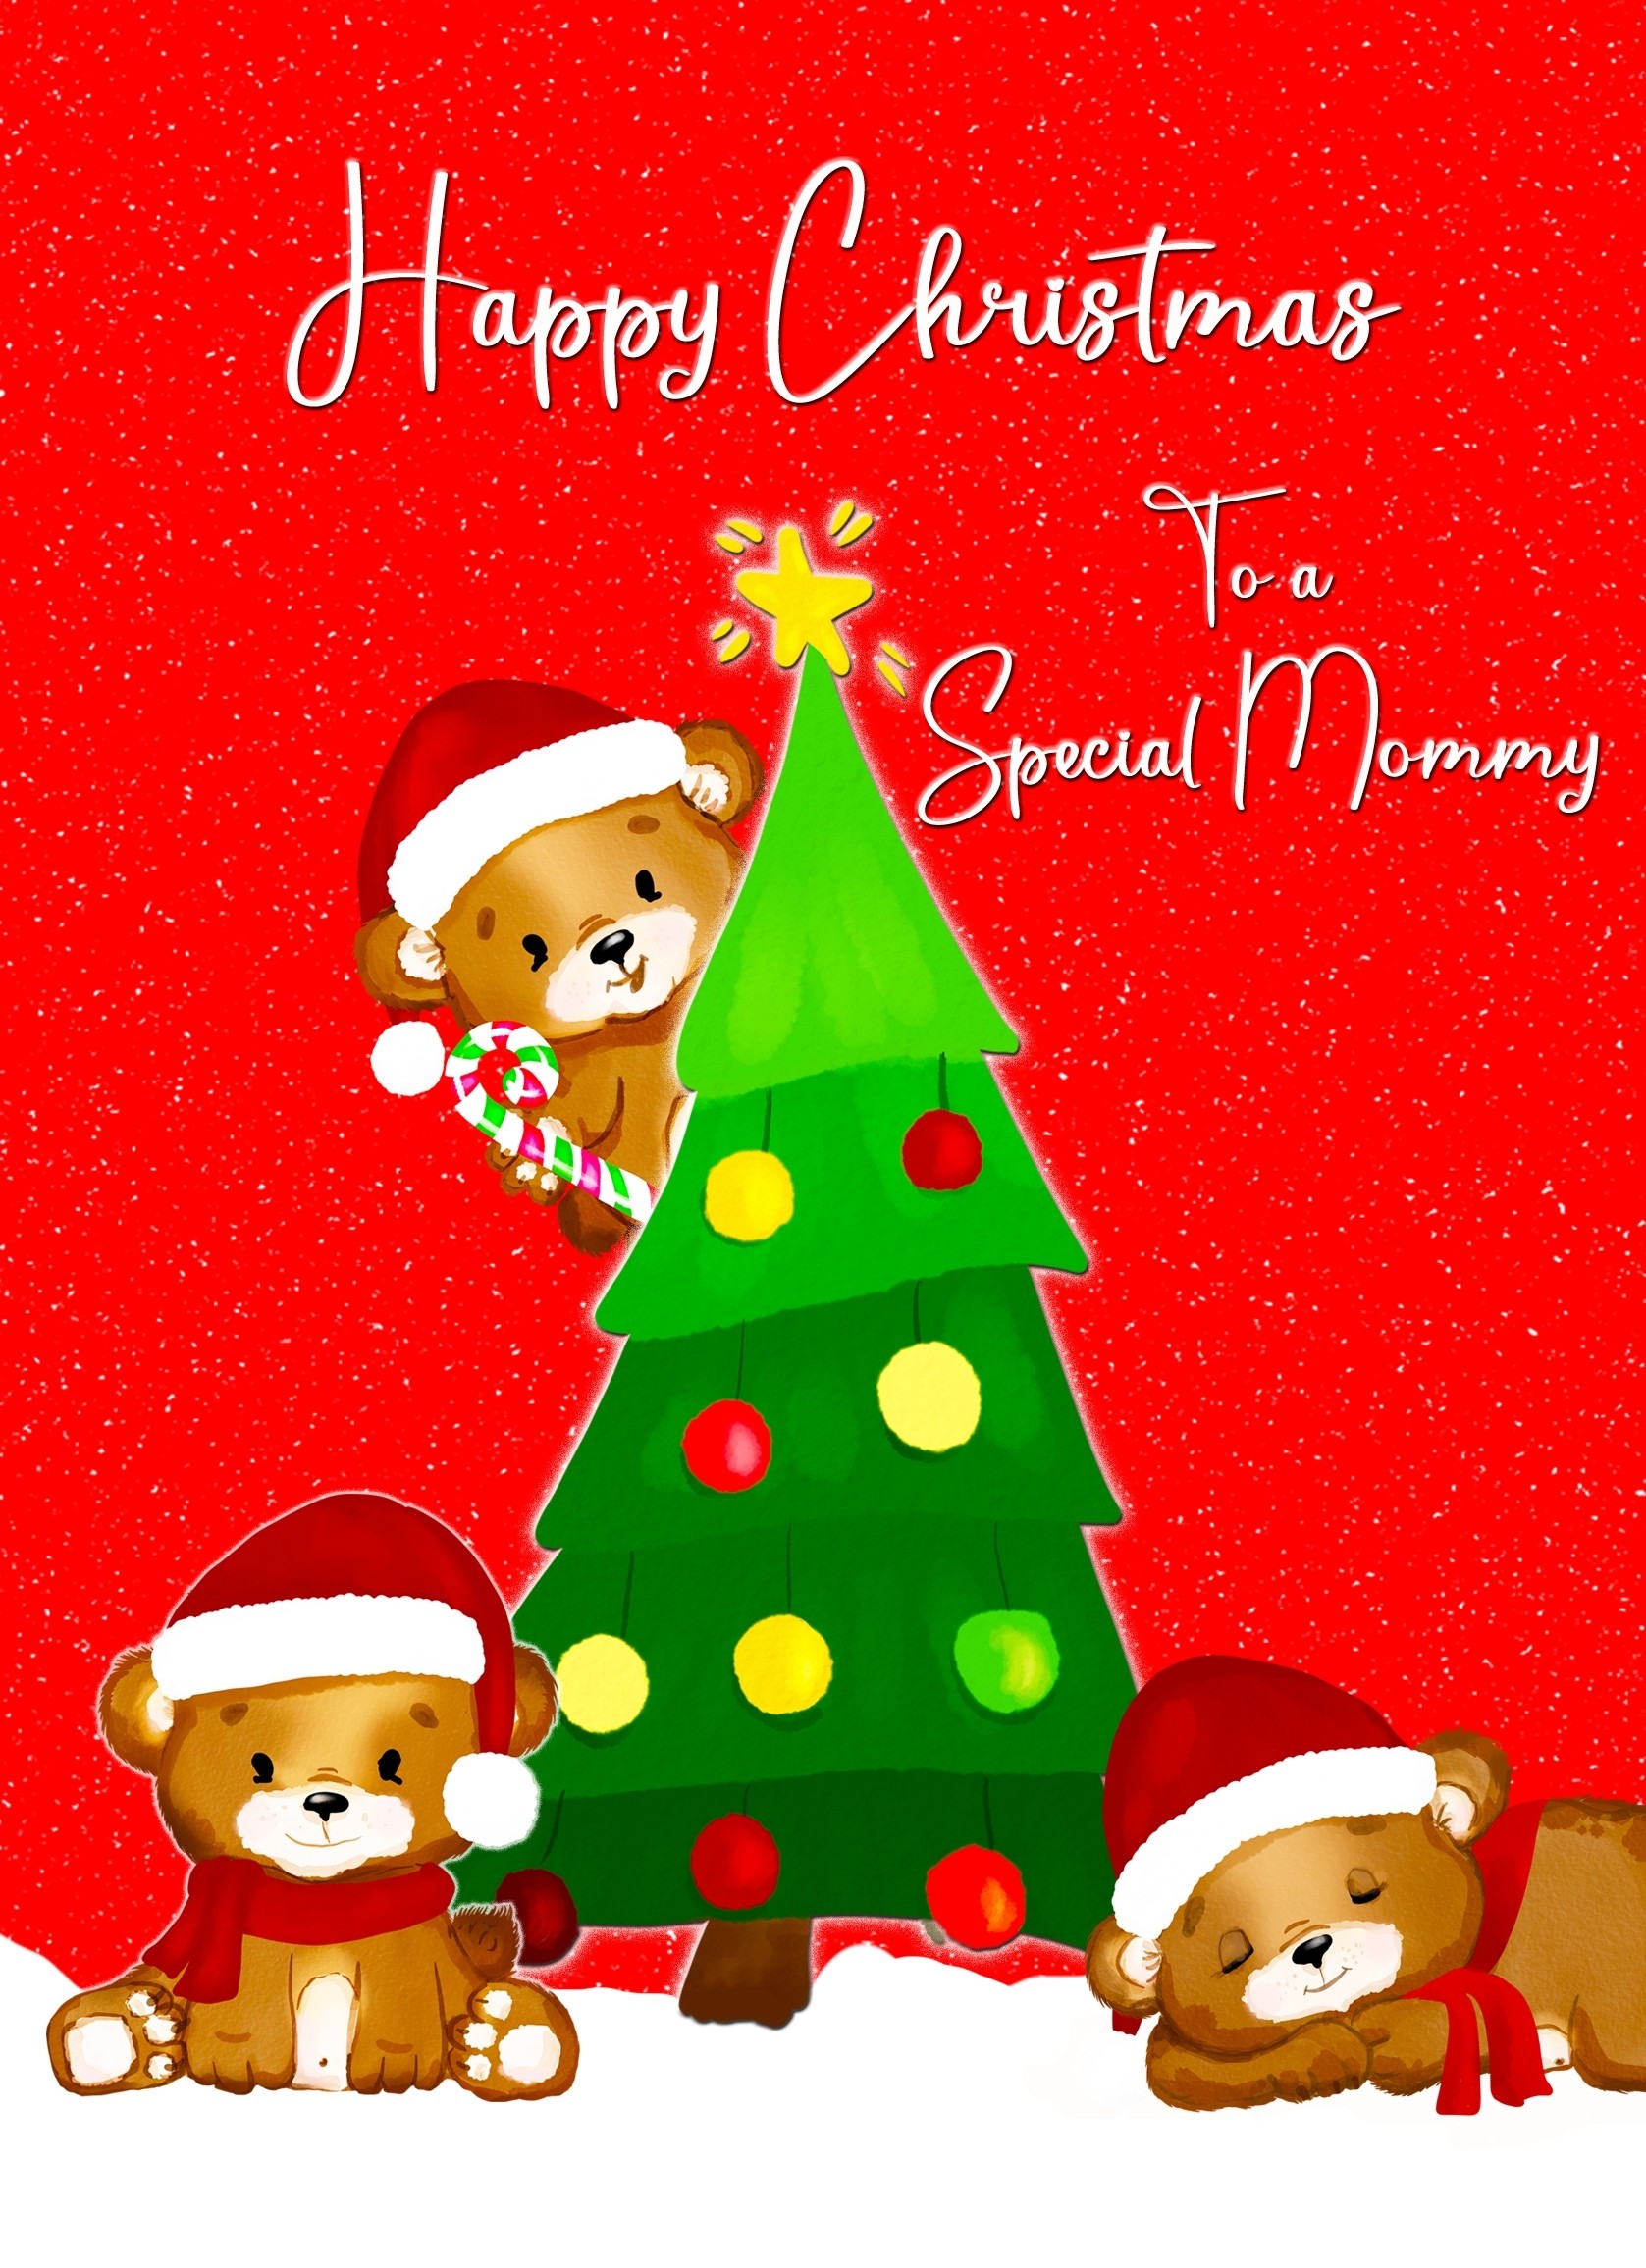 Christmas Card For Mommy (Red Christmas Tree)